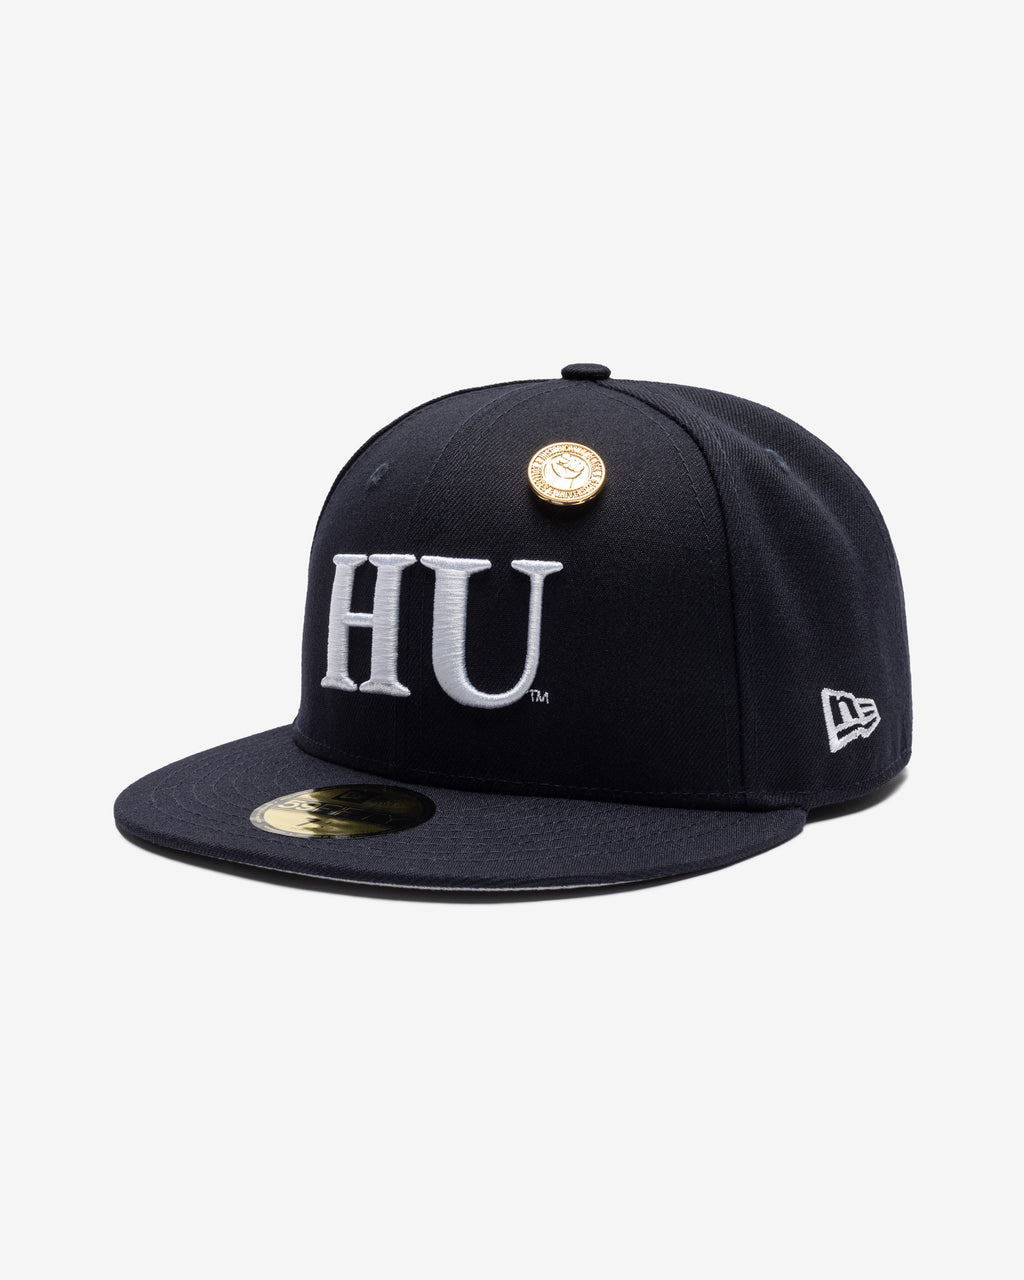 NEW ERA HBCU PIN 59FIFTY FITTED - HOWBIS